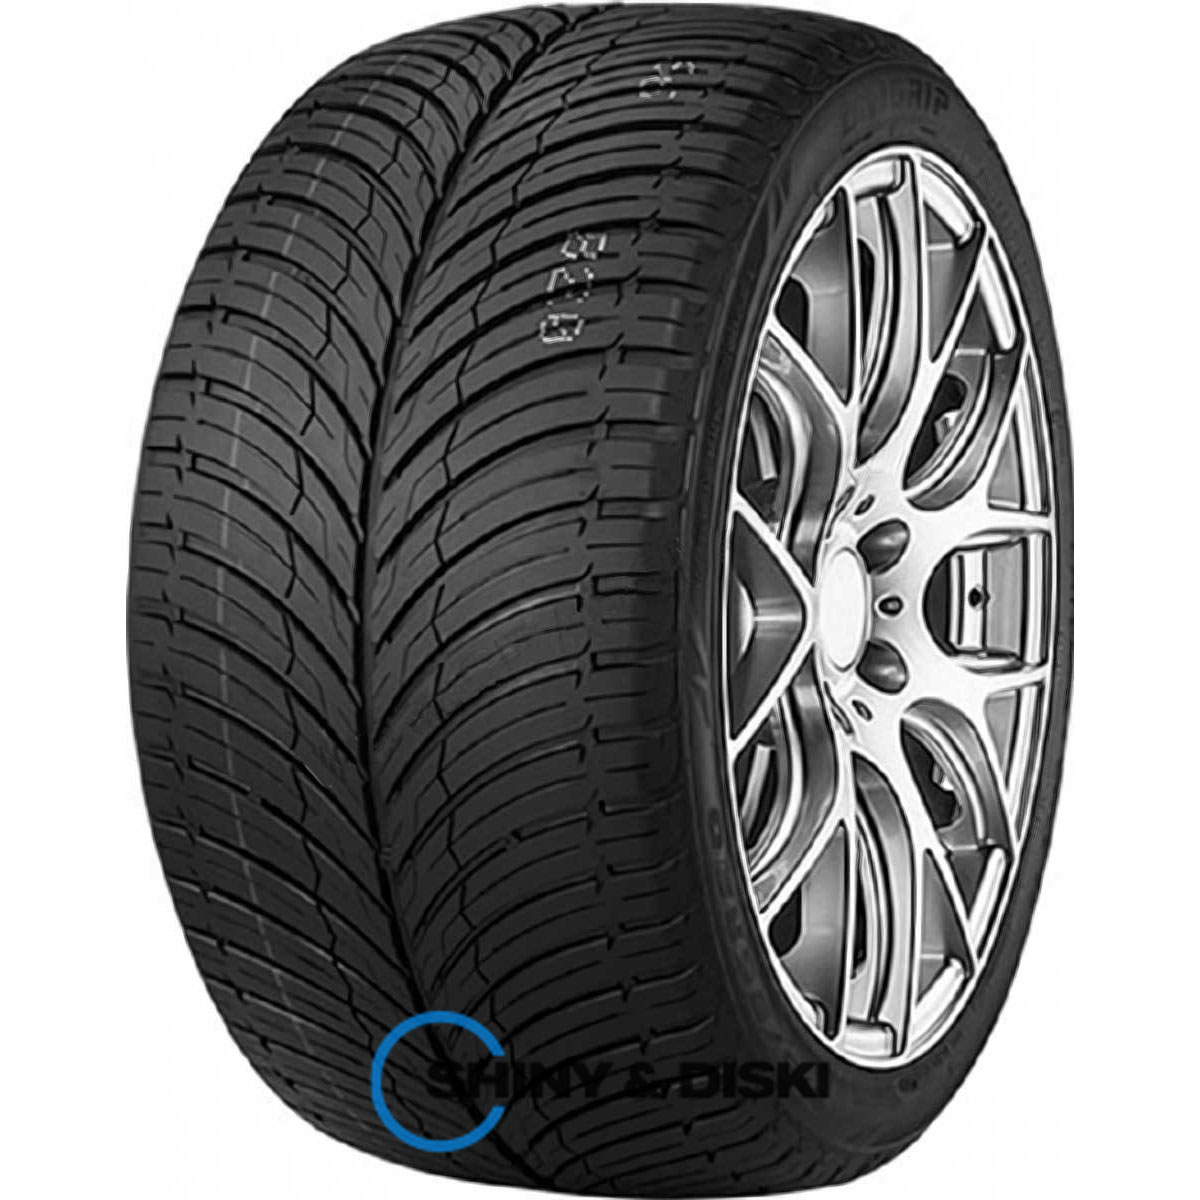 unigrip lateral force 4s 245/50 r18 100w